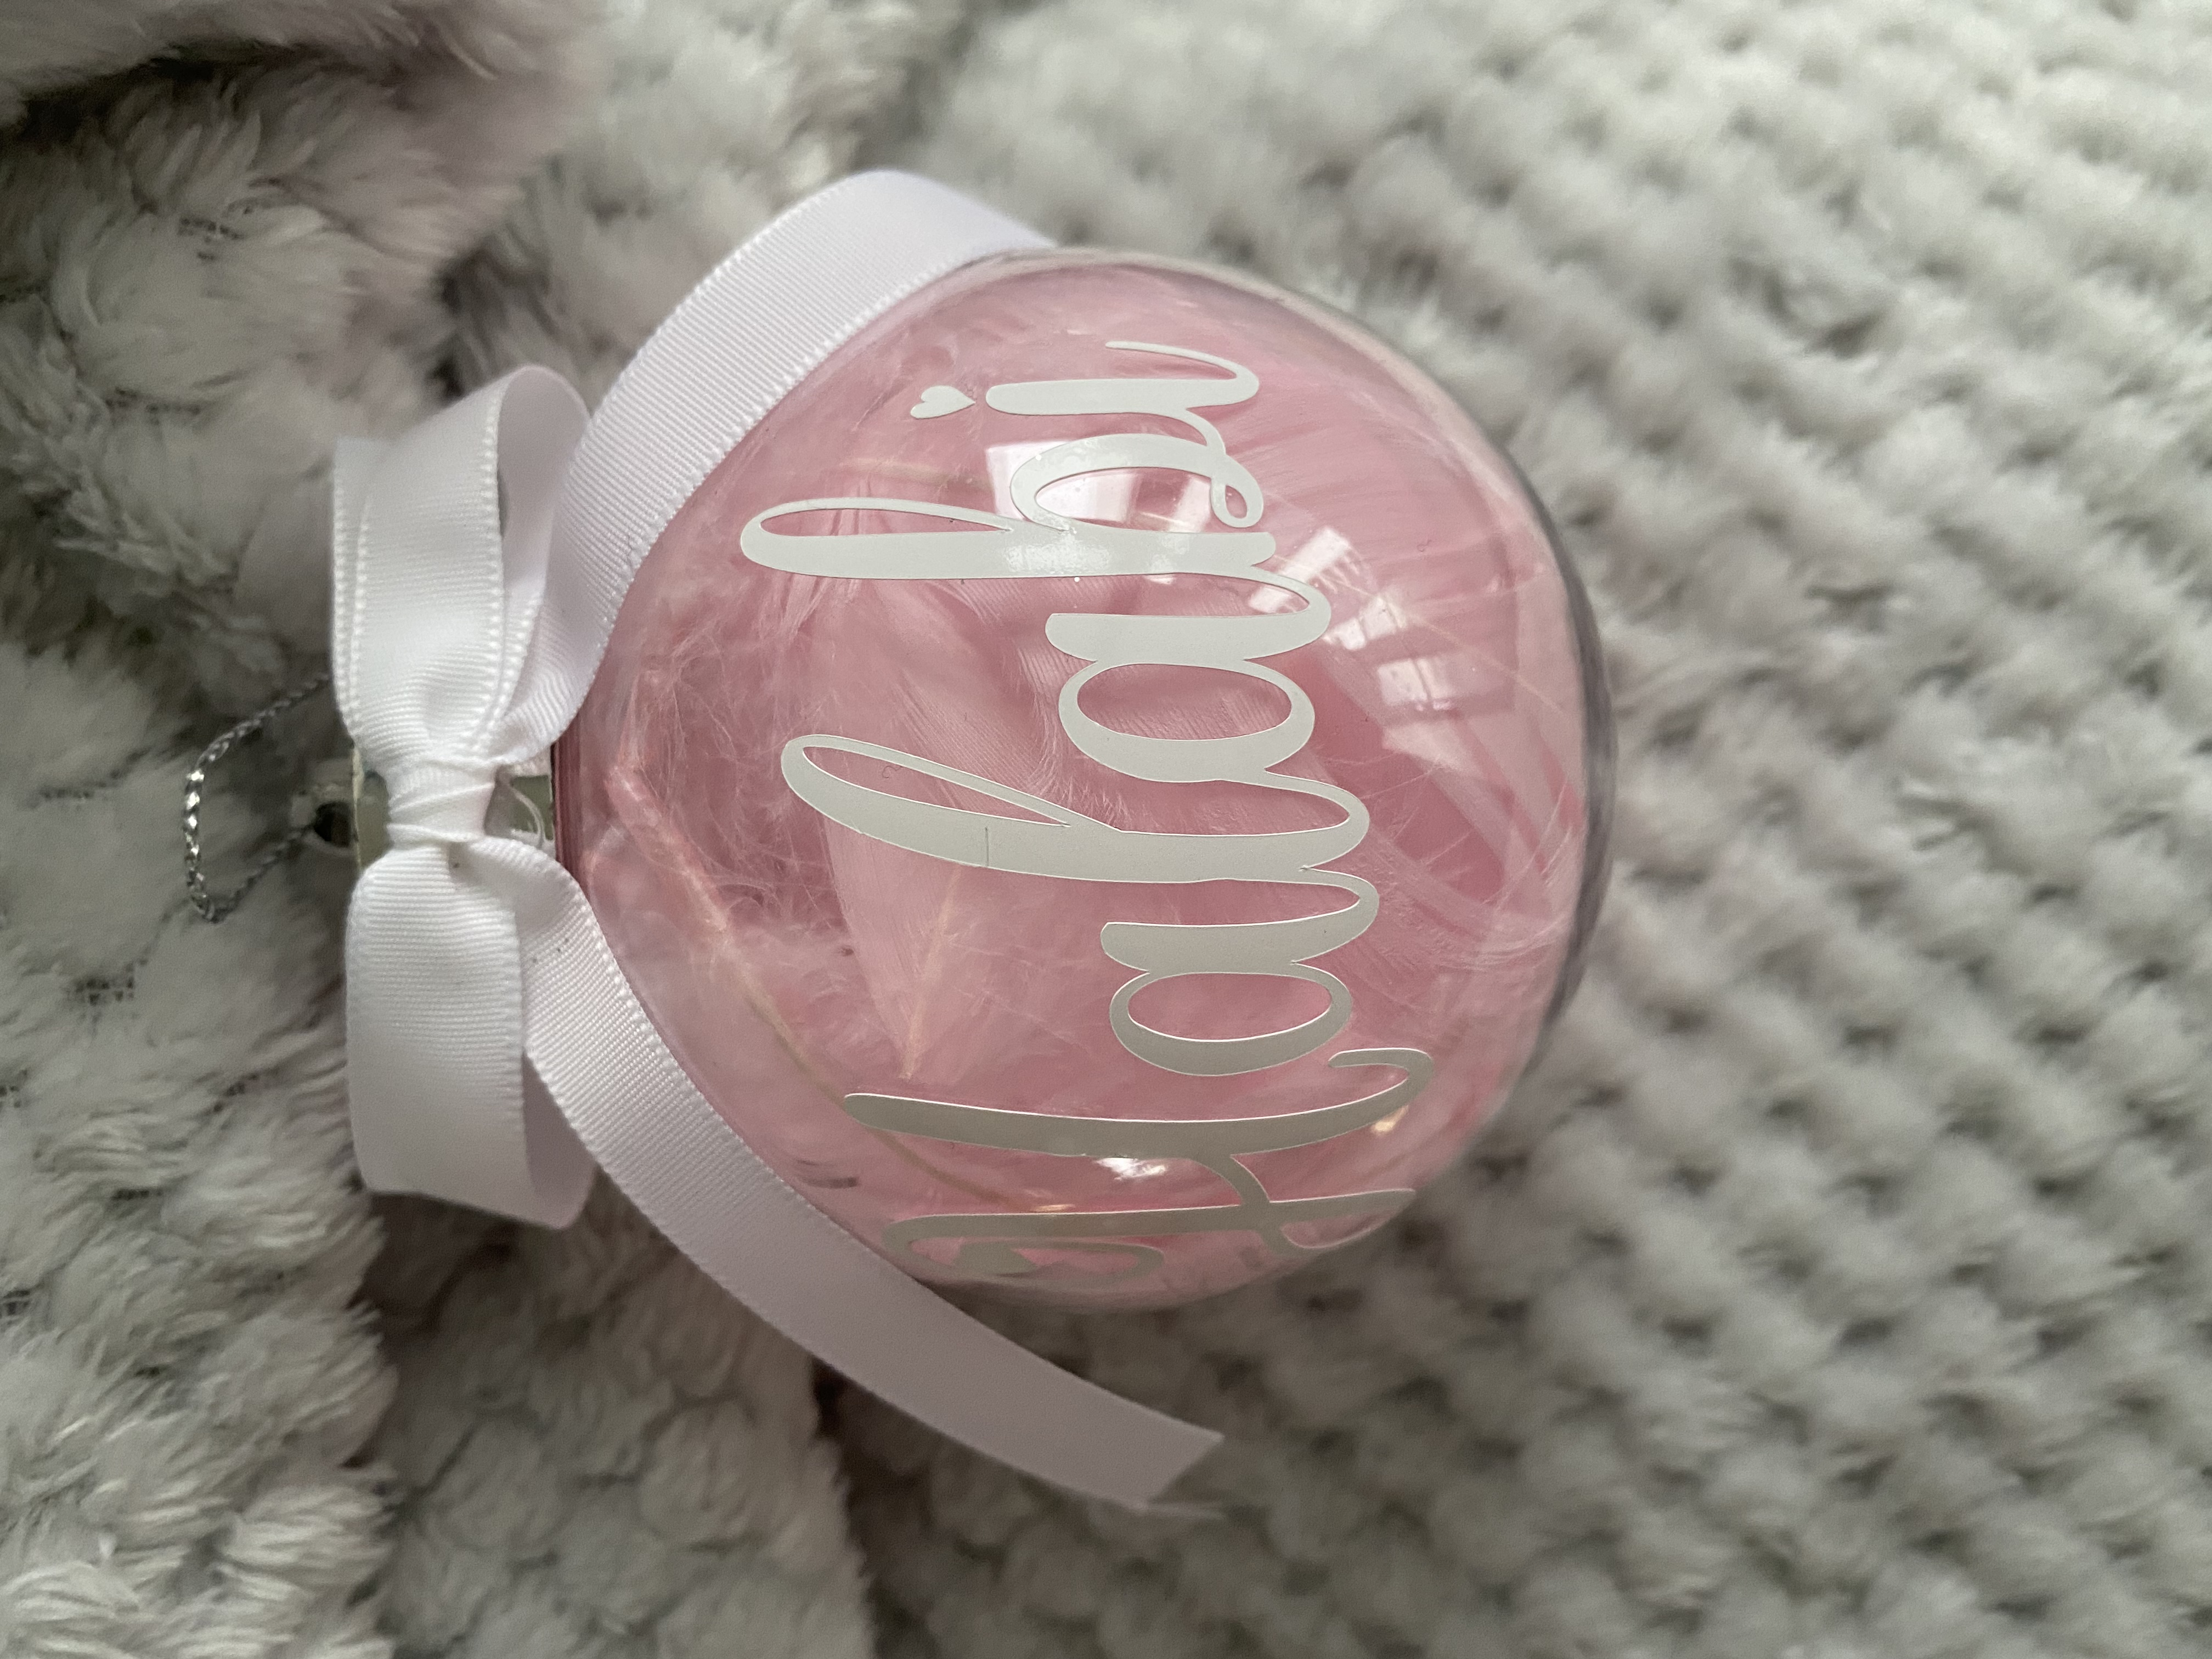 Personalised baubles